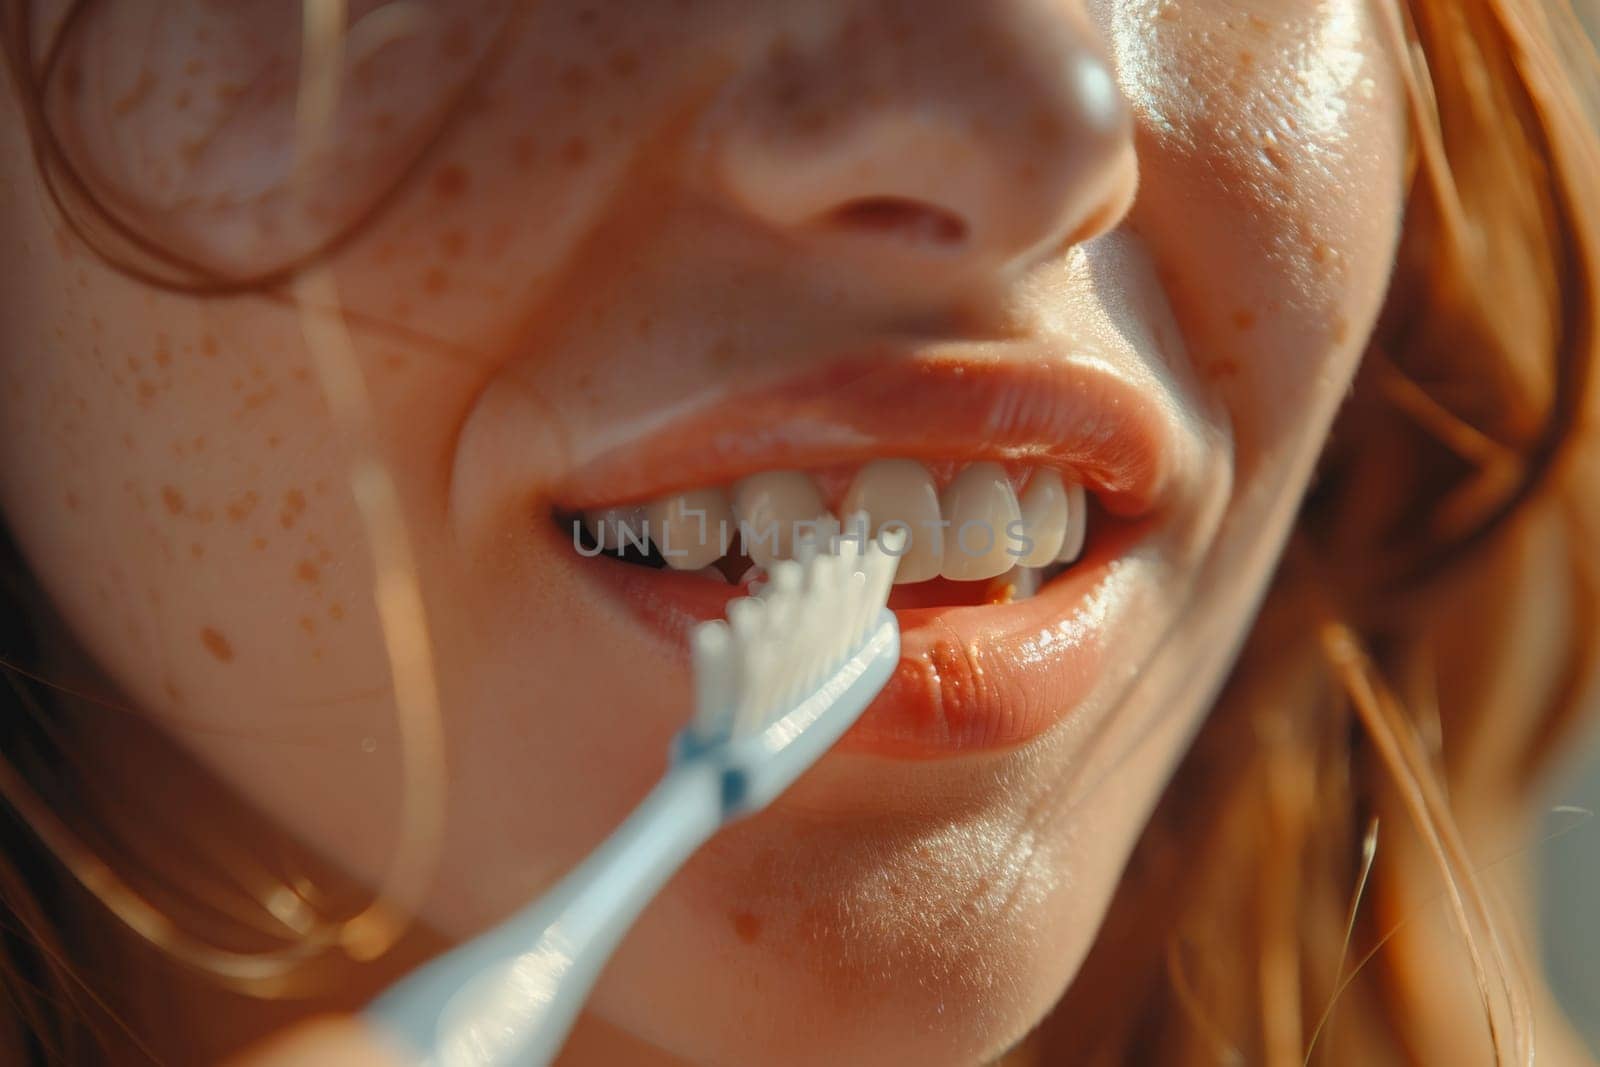 A woman is brushing her teeth with a toothbrush. She has a smile on her face, indicating that she is happy and content